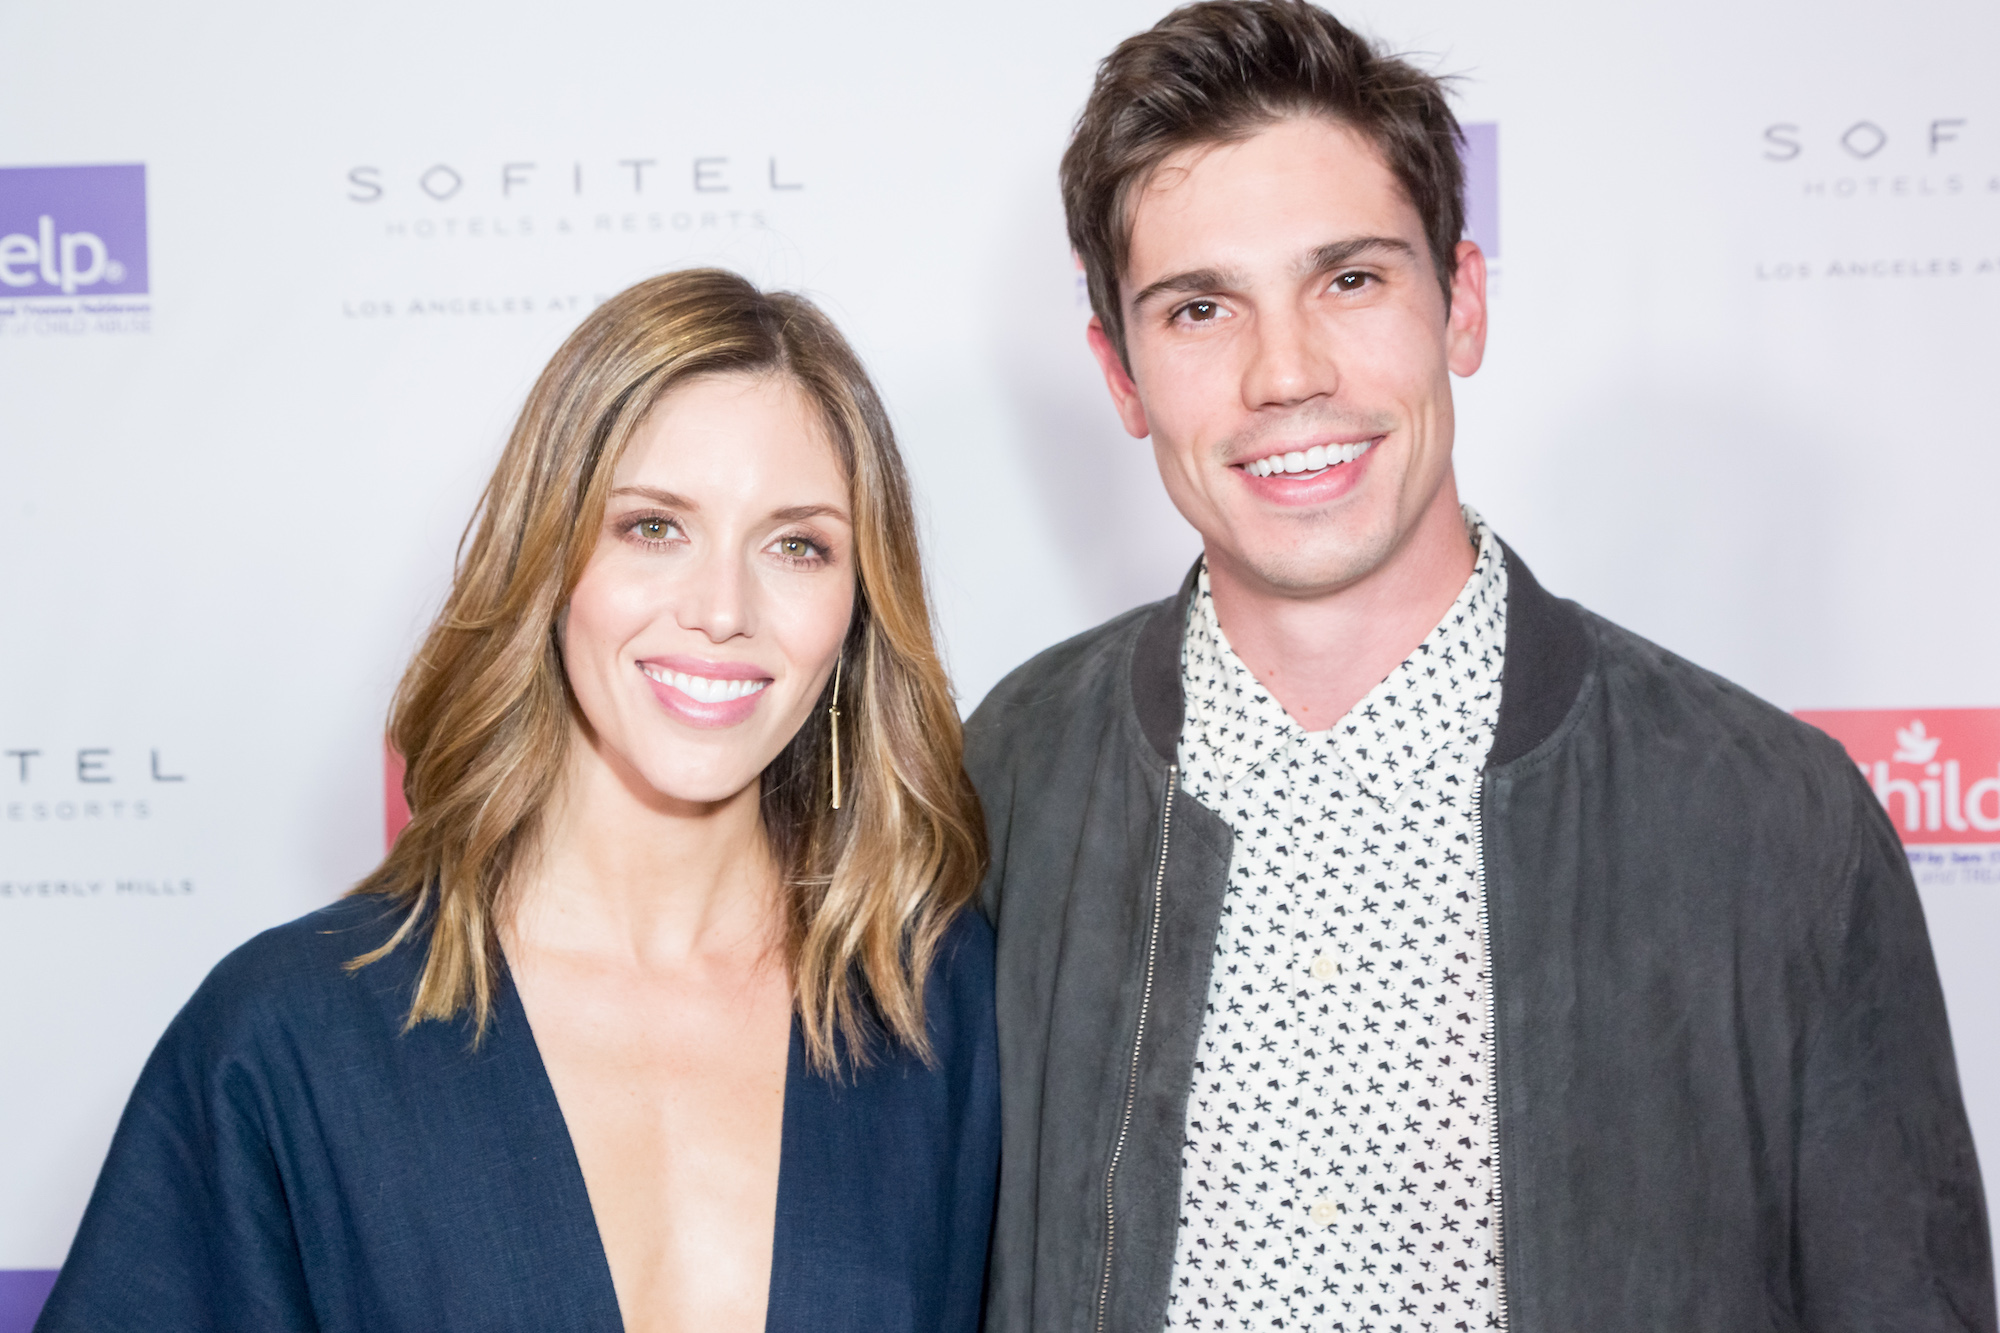 (L-R) Kayla Ewell and Tanner Novlan smiling in front of a white wall